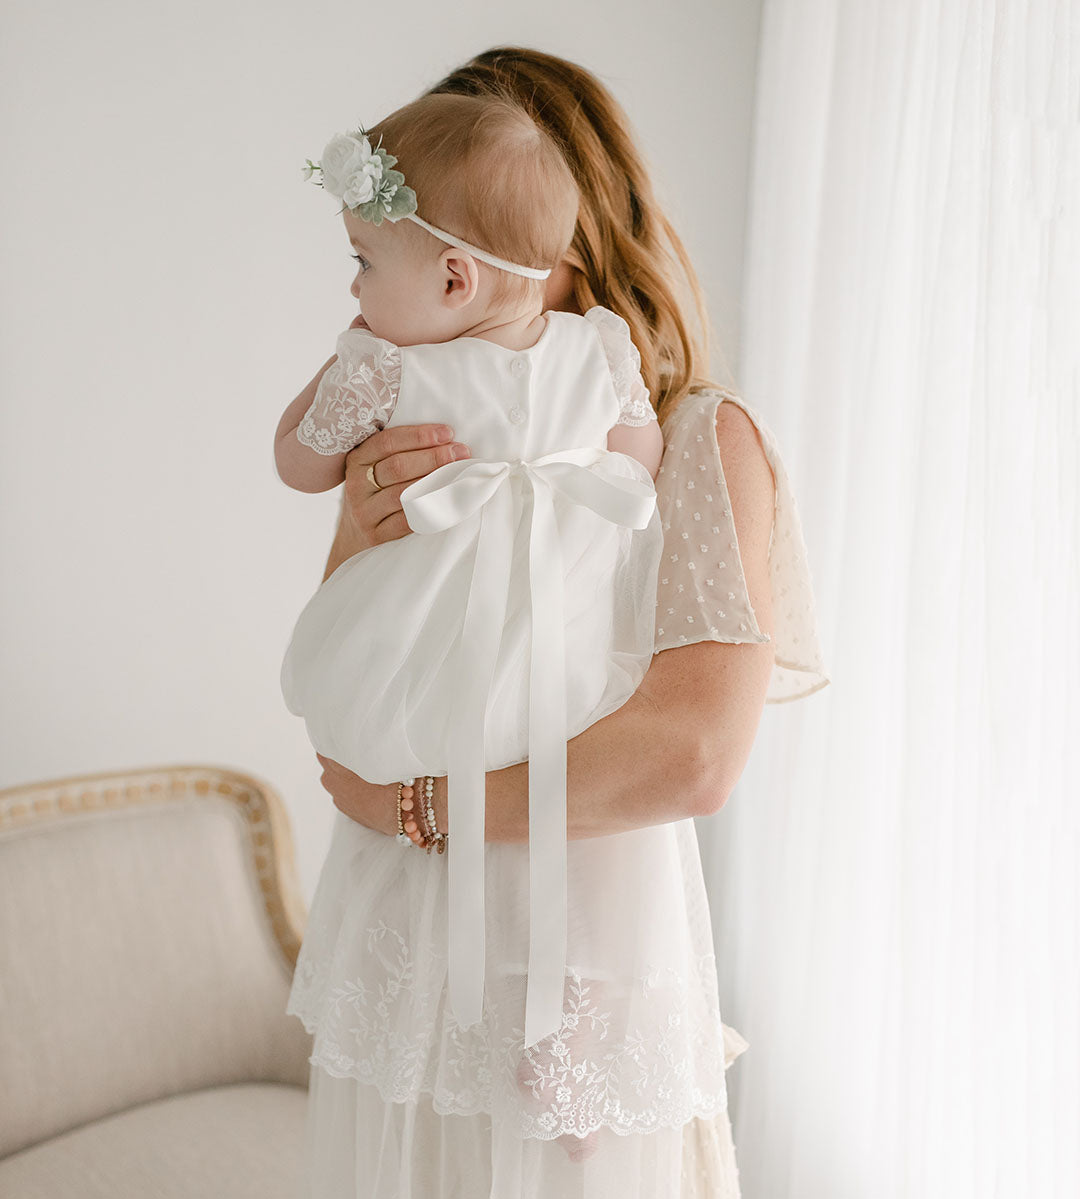 mom holding baby daughter wearing ella baptism gown with silk bow at back